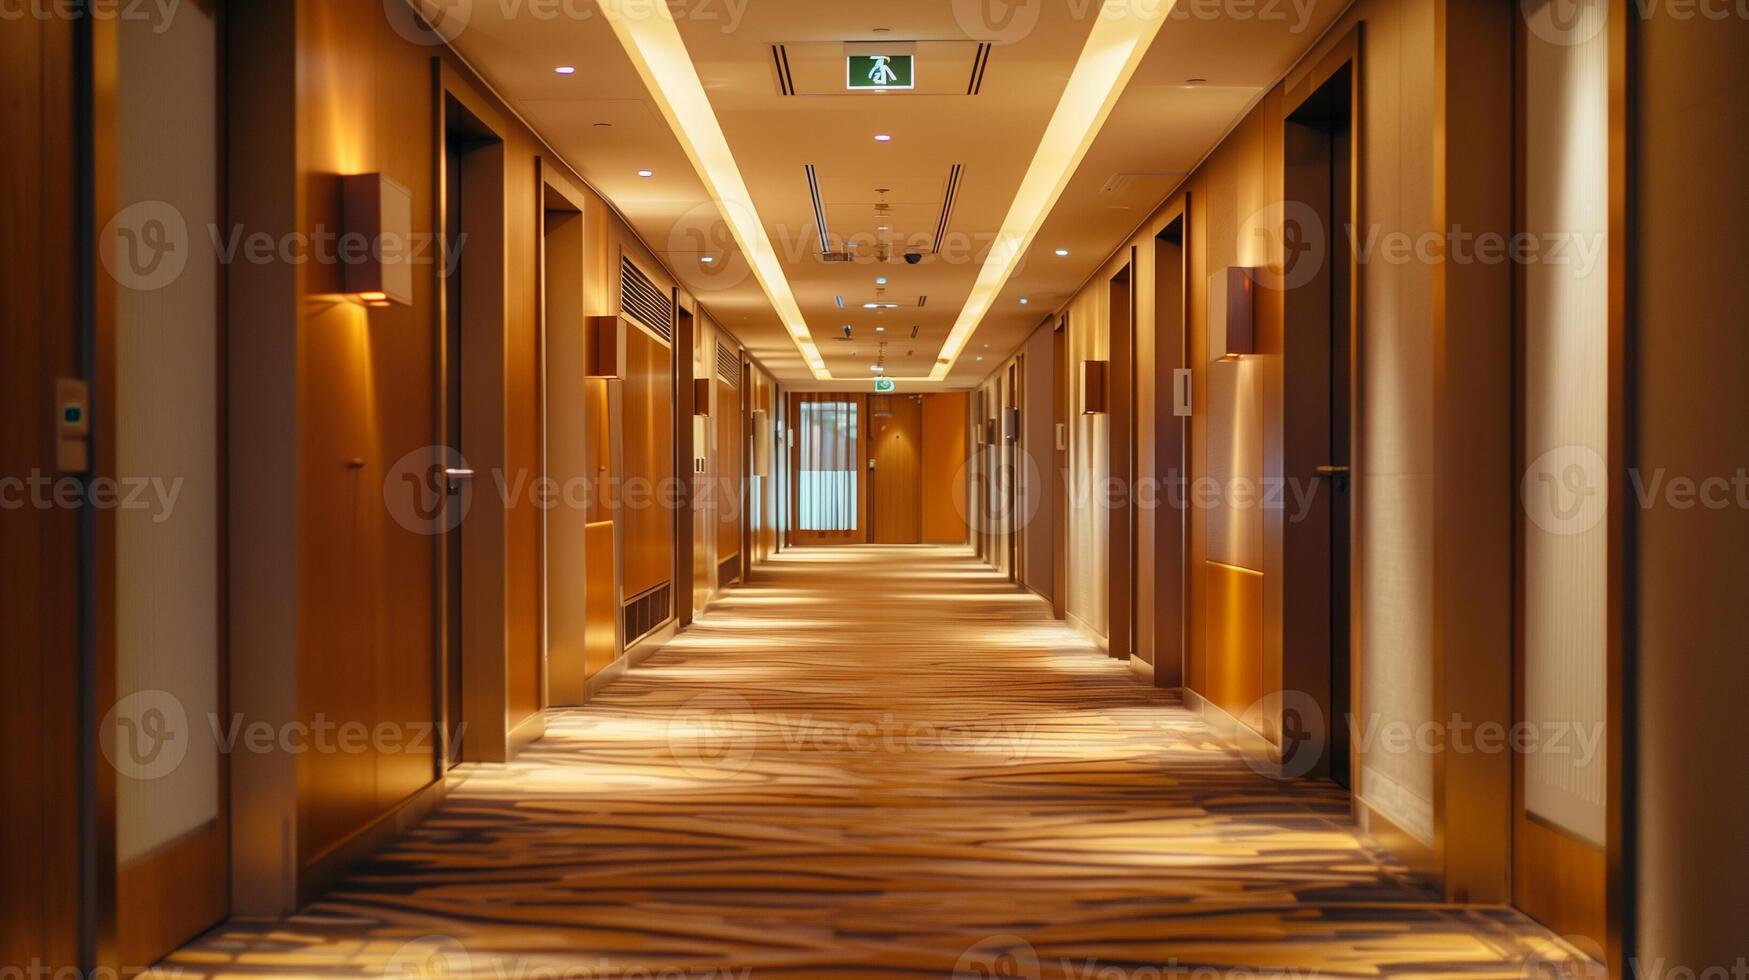 Modern hotel corridor with wooden floors and warm lighting, suitable for business travel, hospitality, and real estate concepts photo